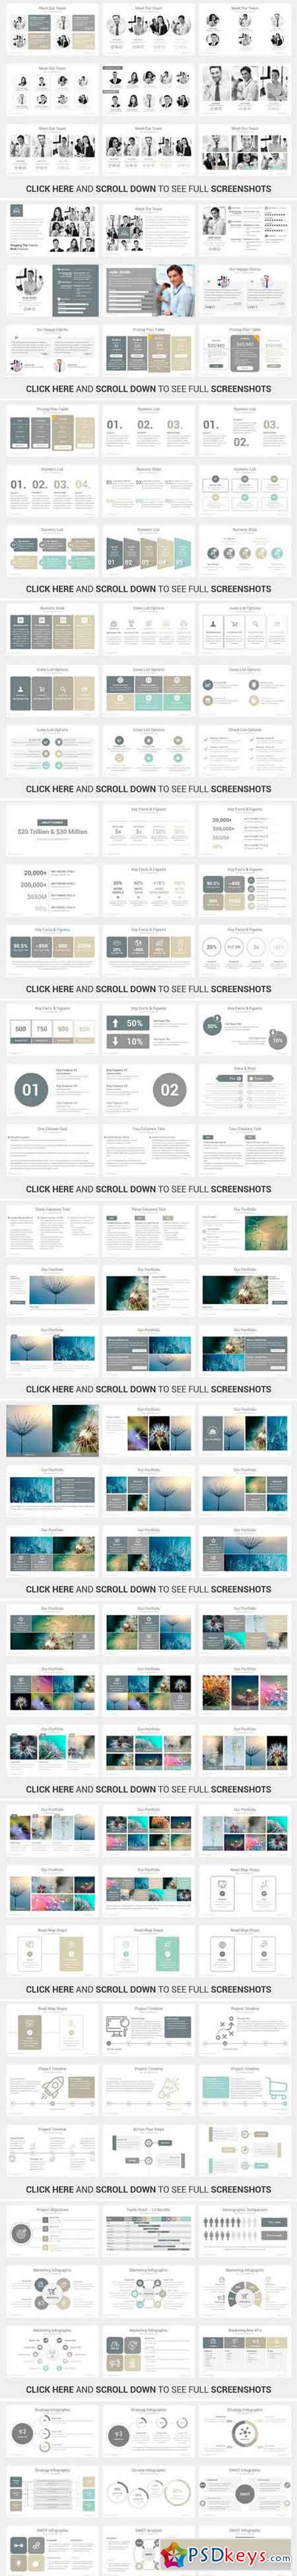 simplicity-powerpoint-2380048-free-download-photoshop-vector-stock